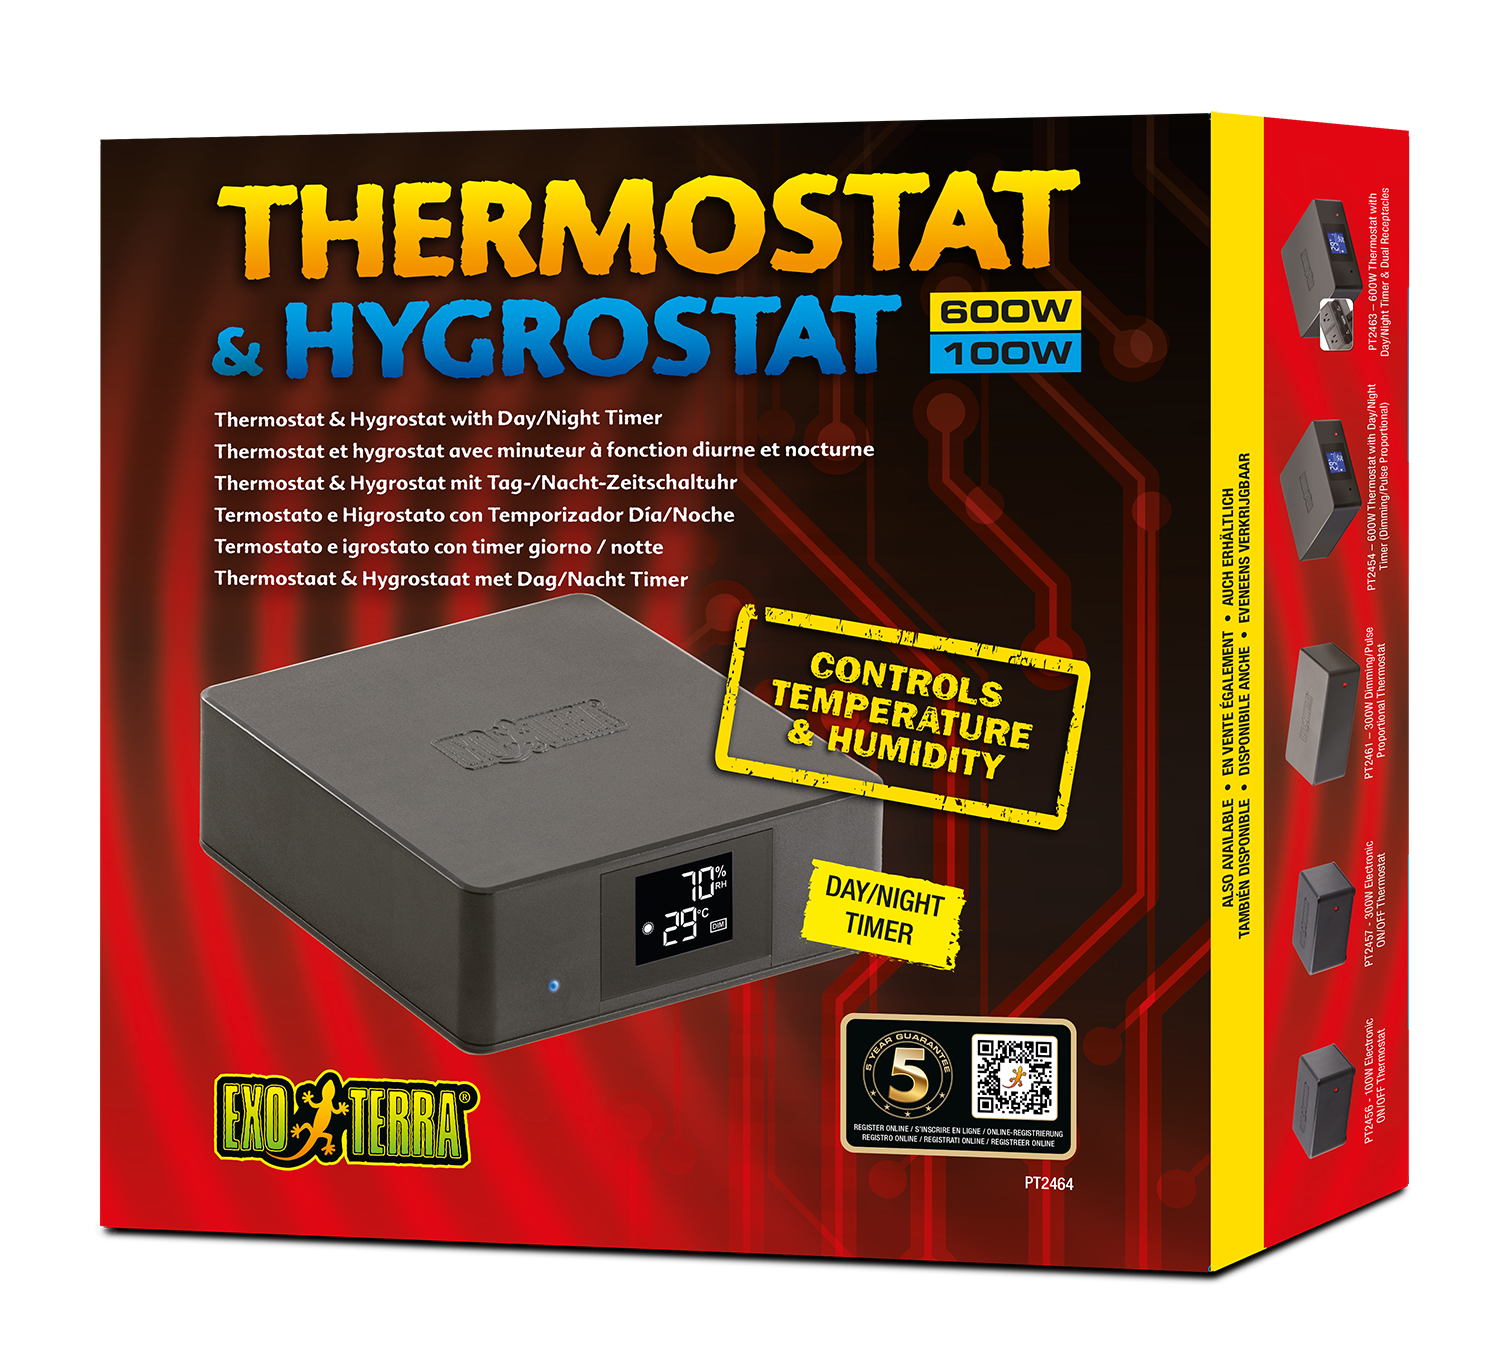 Exoterra 600w thermostat and 100w hygrostat with daytime and nighttime timer